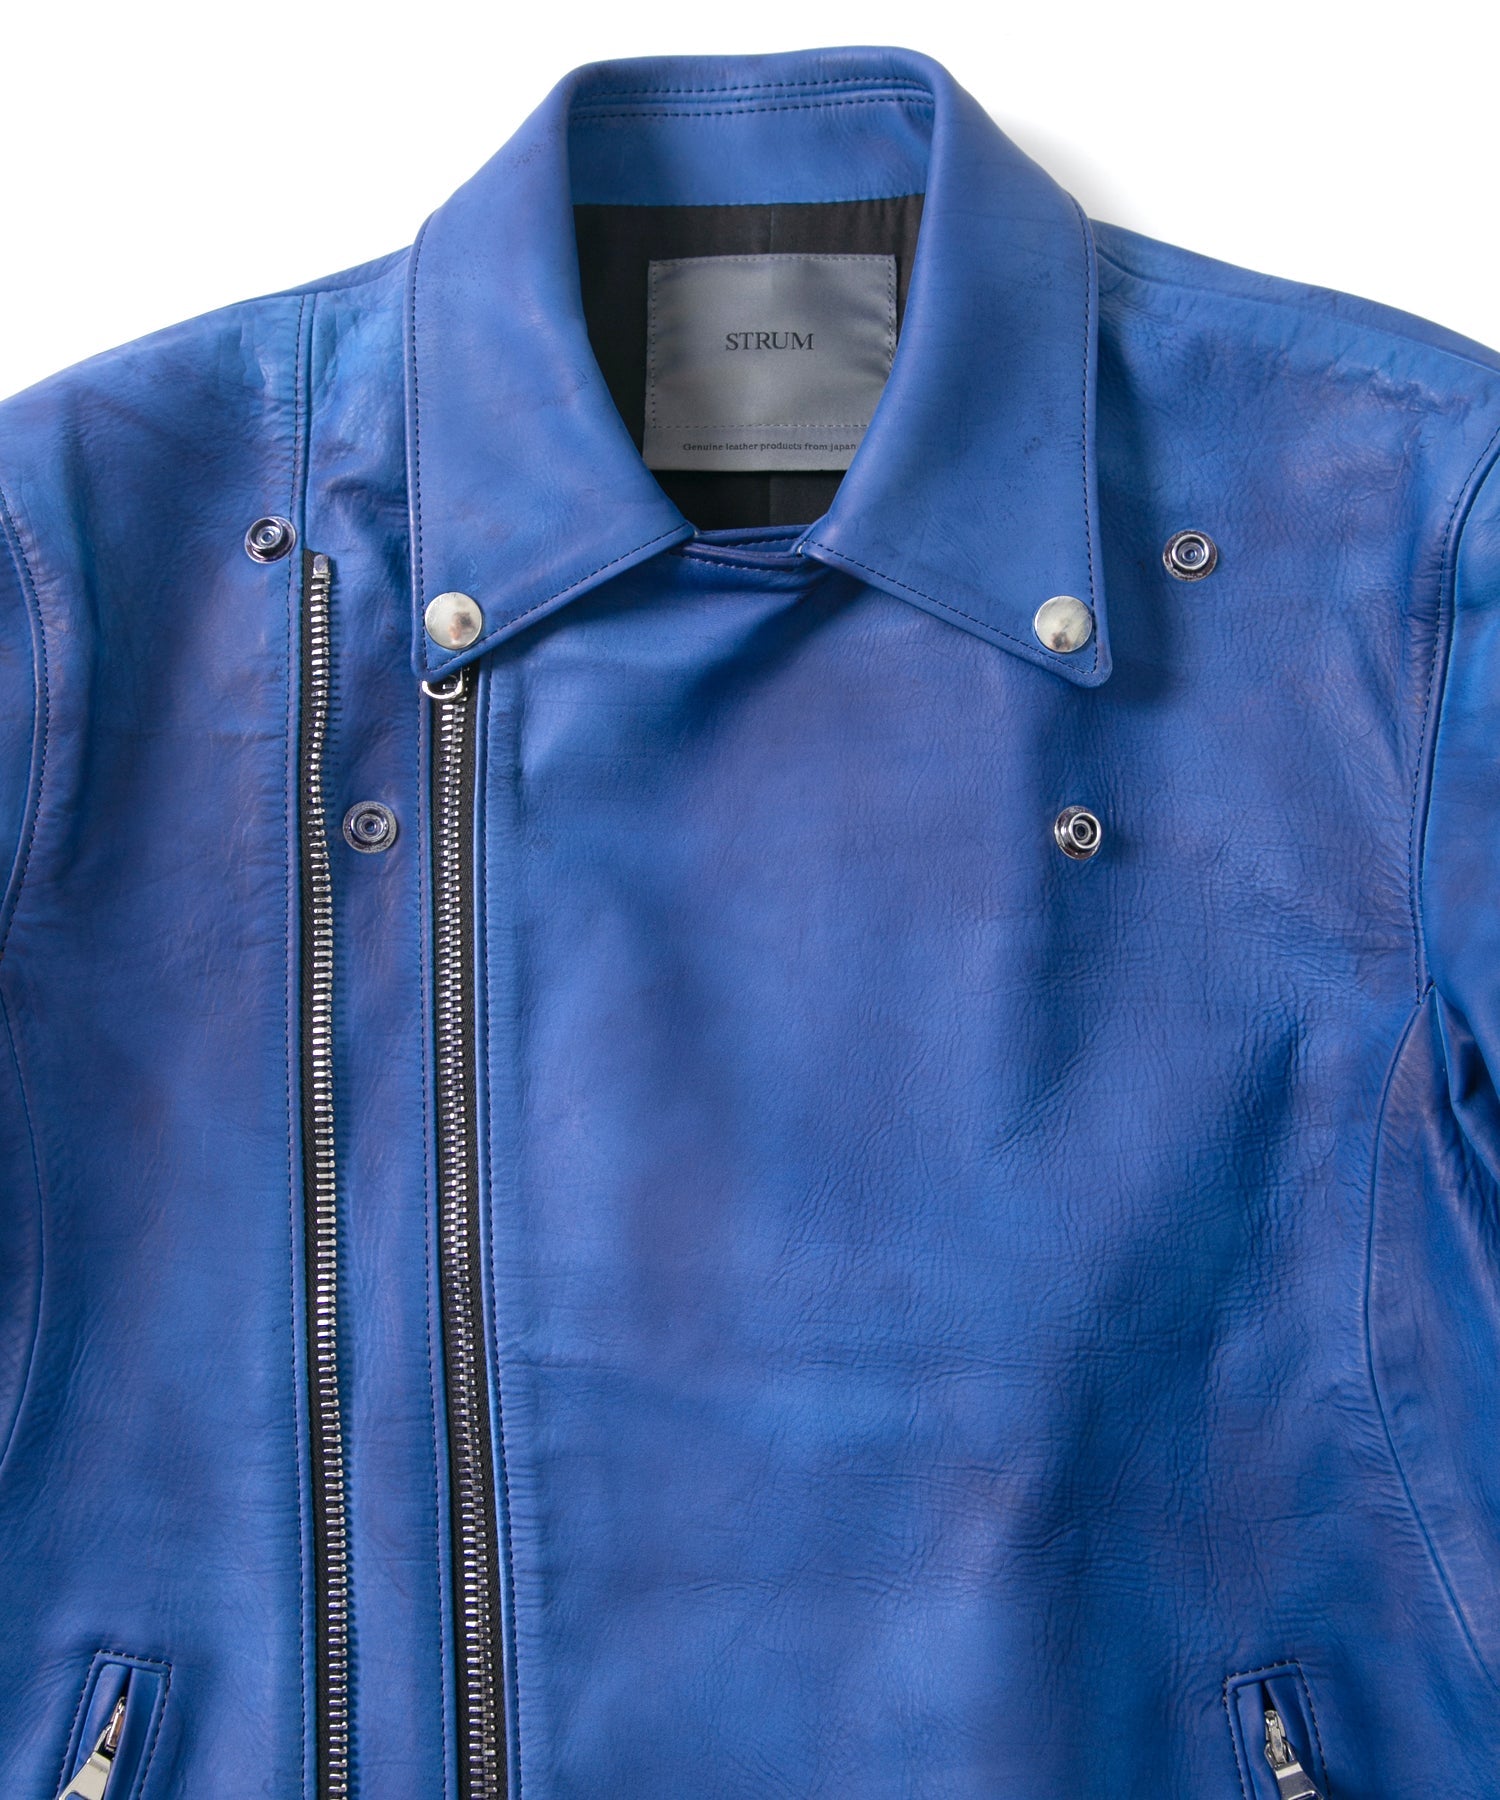 Load image into Gallery viewer, Vegetable Full tanning Calfskin Garment Burning Dyed RAVEN Double Riders Jacket - ROYAL BLUE